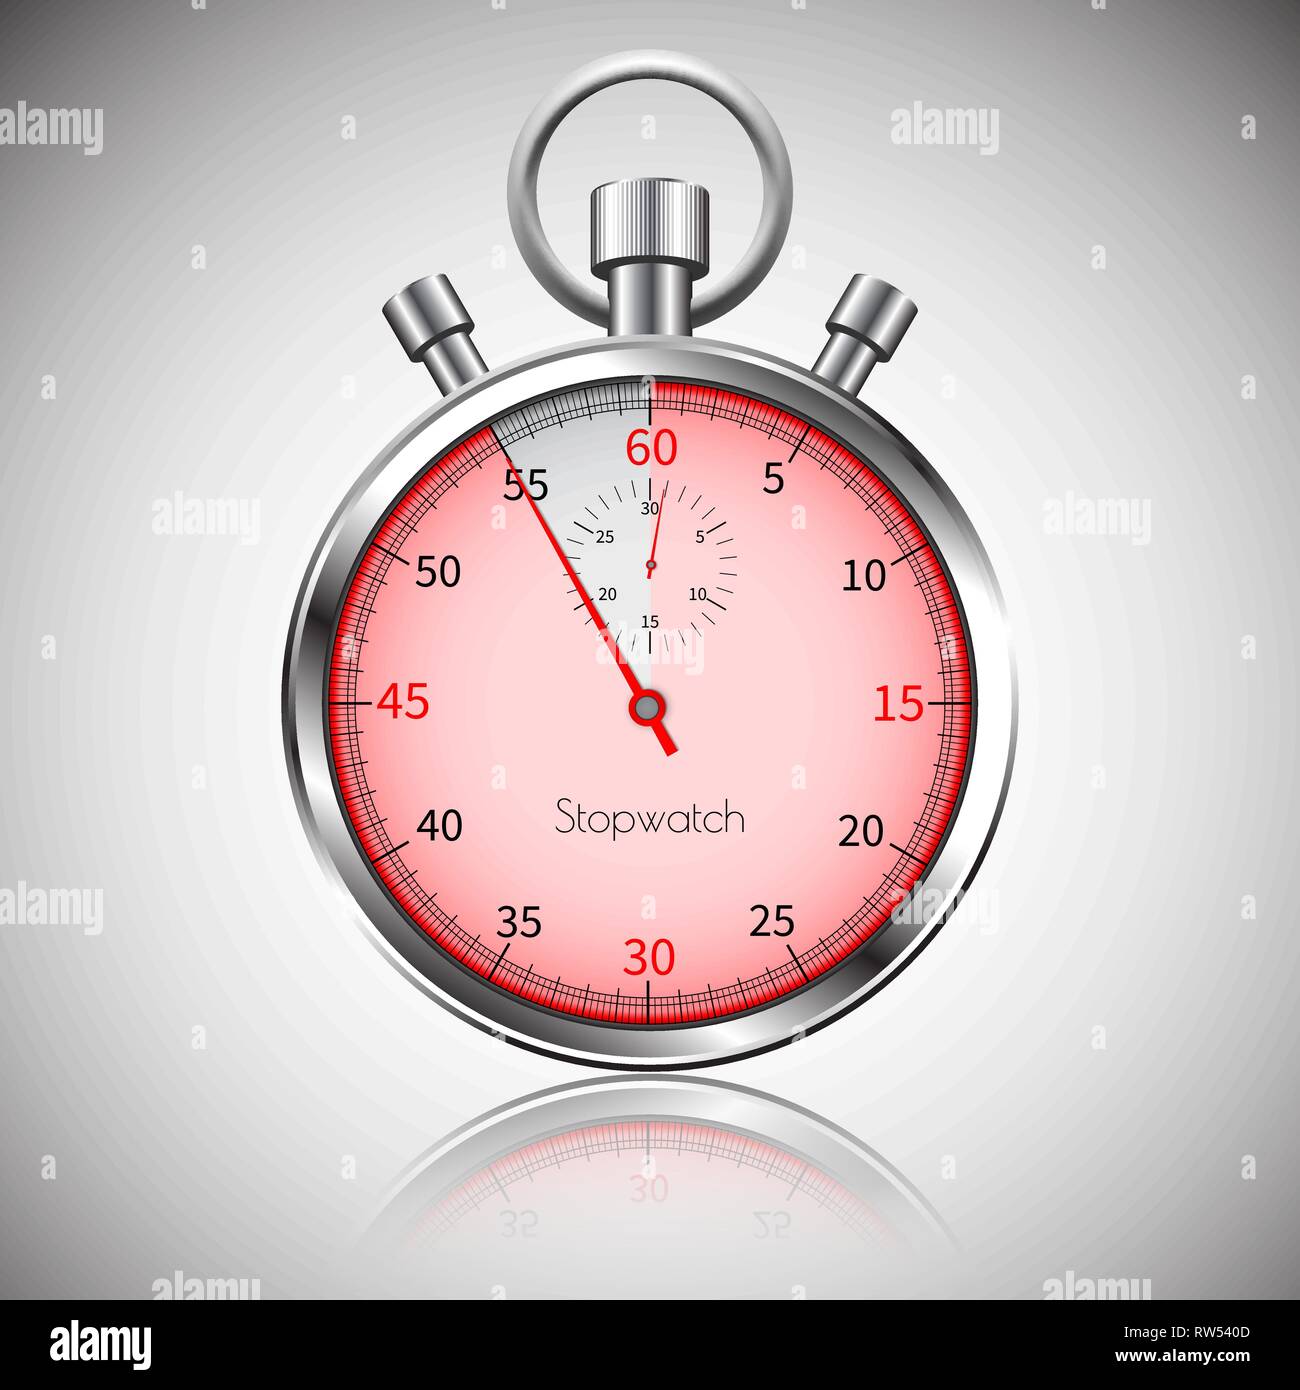 https://c8.alamy.com/comp/RW540D/55-seconds-silver-realistic-stopwatch-with-reflection-vector-RW540D.jpg